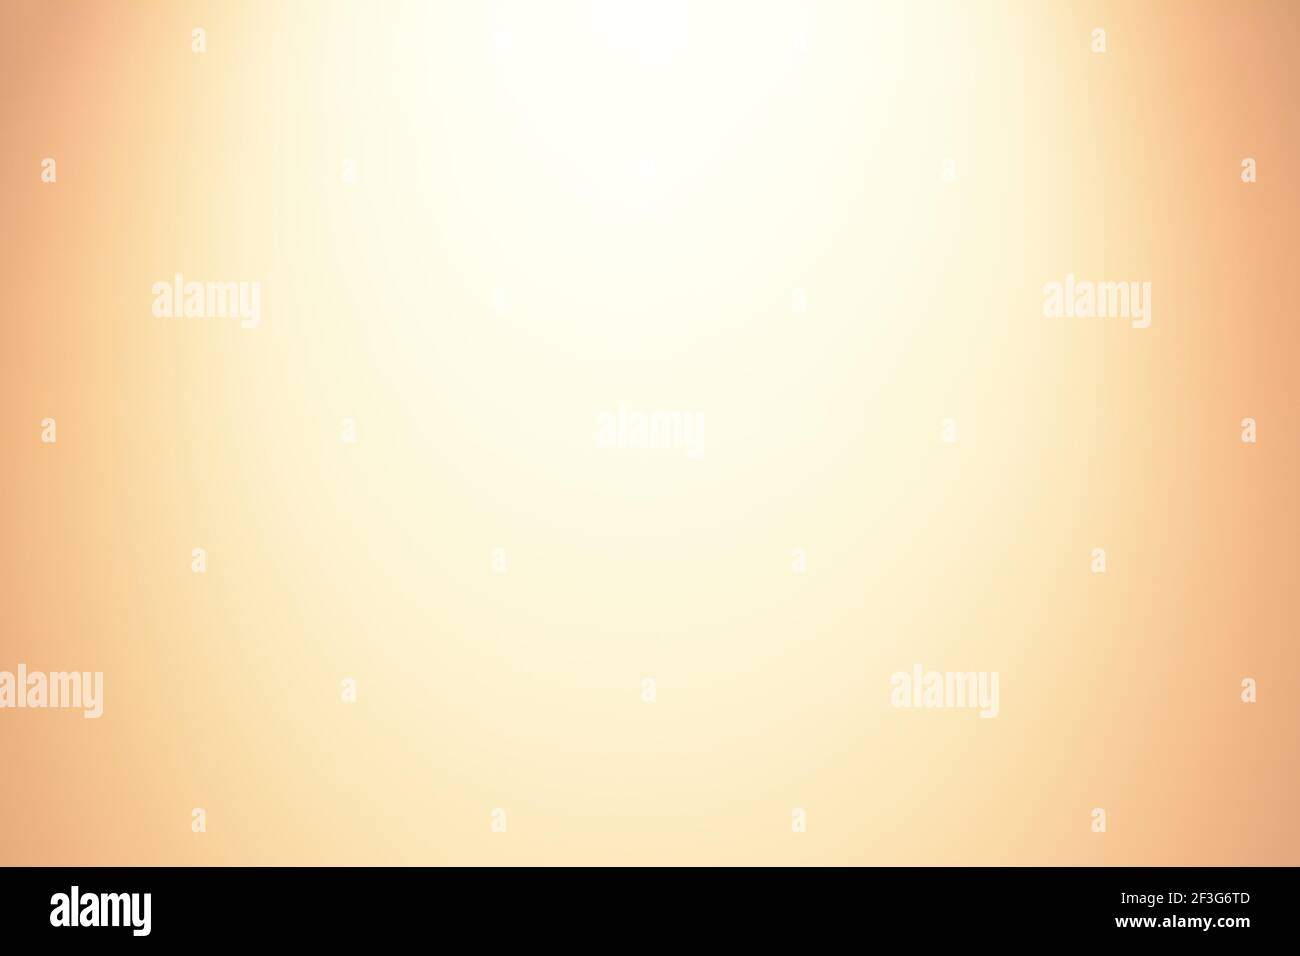 Light brown (beige) gradient abstract background Stock Photo - Alamy